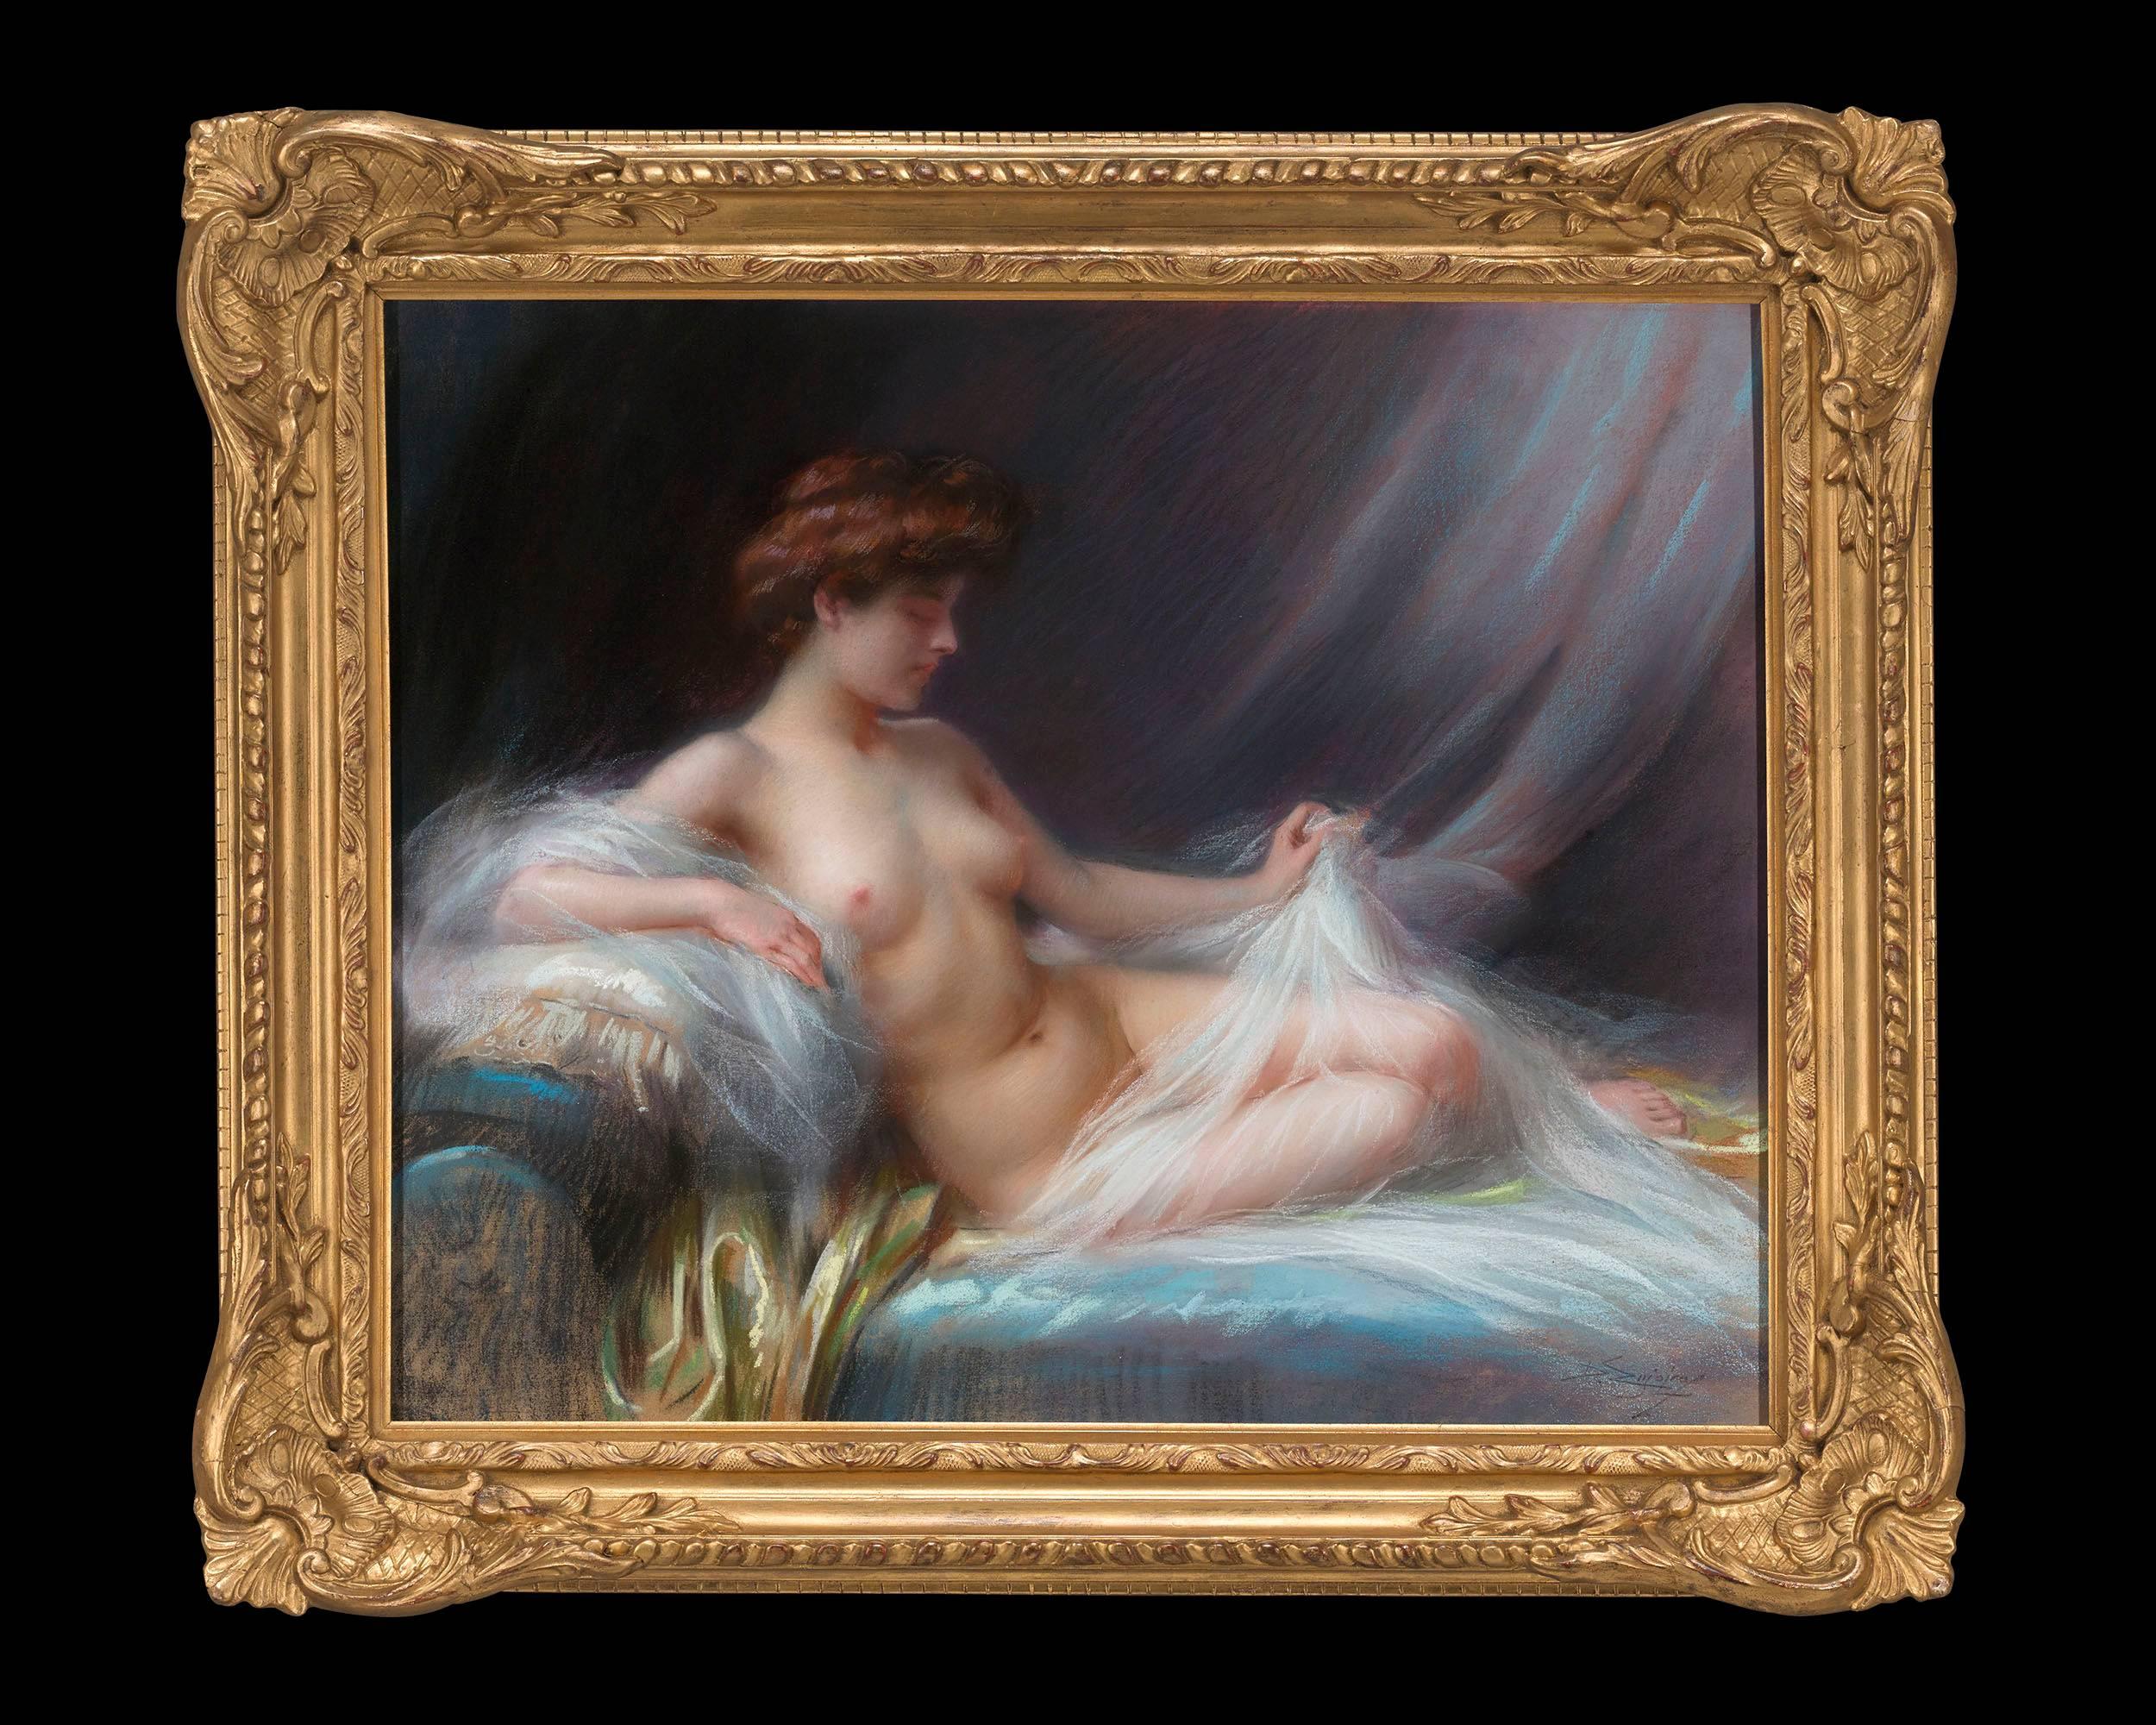  Reclining Female Nude  - Painting by Delphin Enjolras